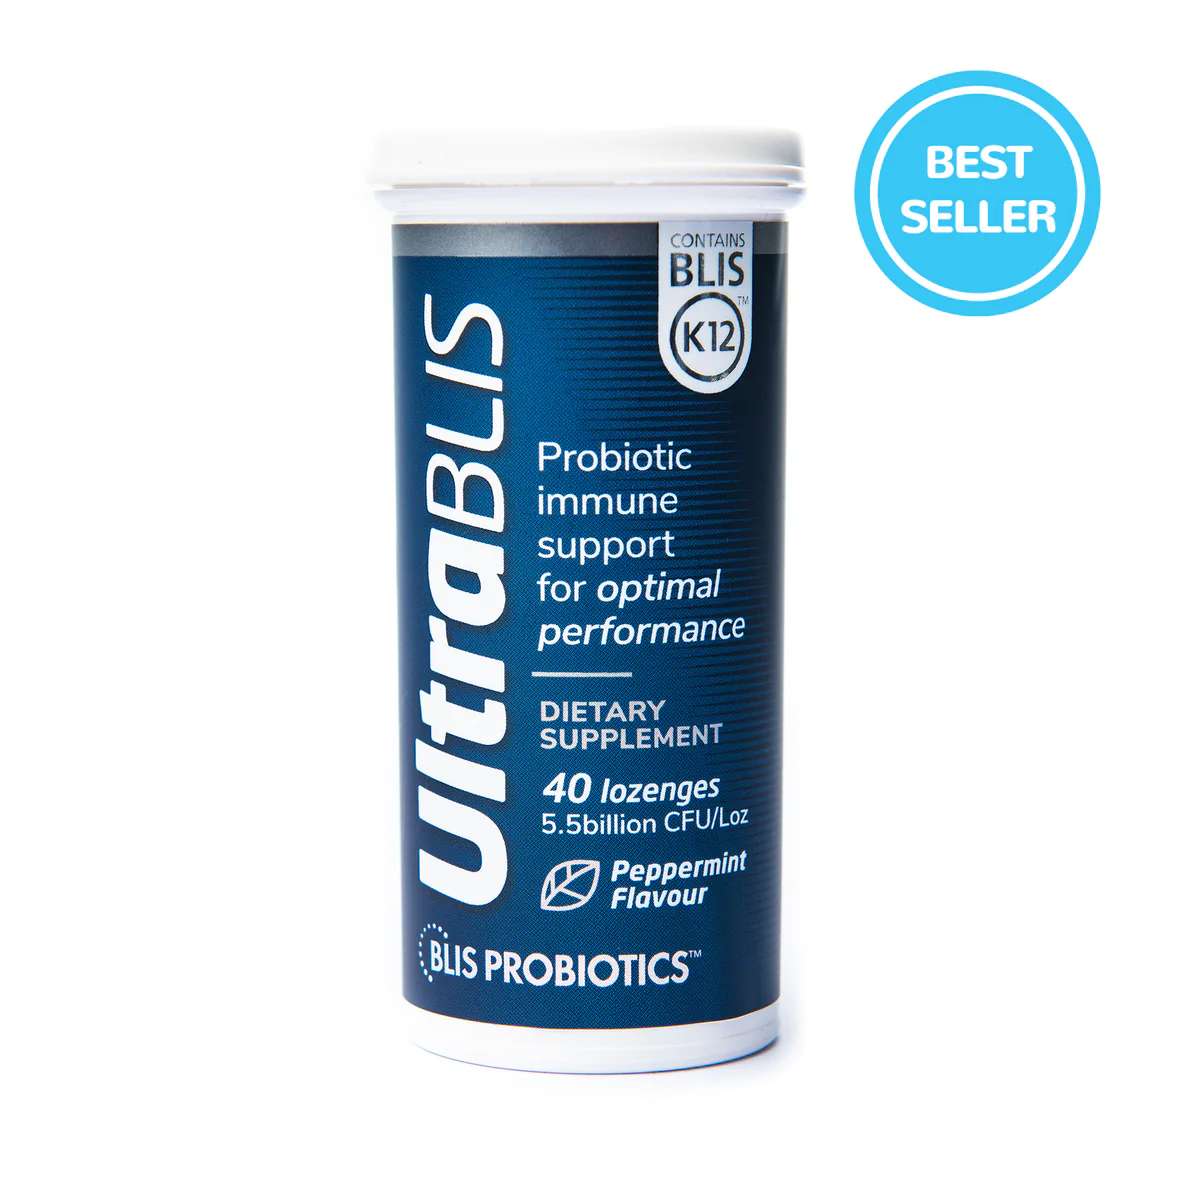 Image of UltraBLIS - The best probiotic for gut health and immune support. | Blis Probiotics